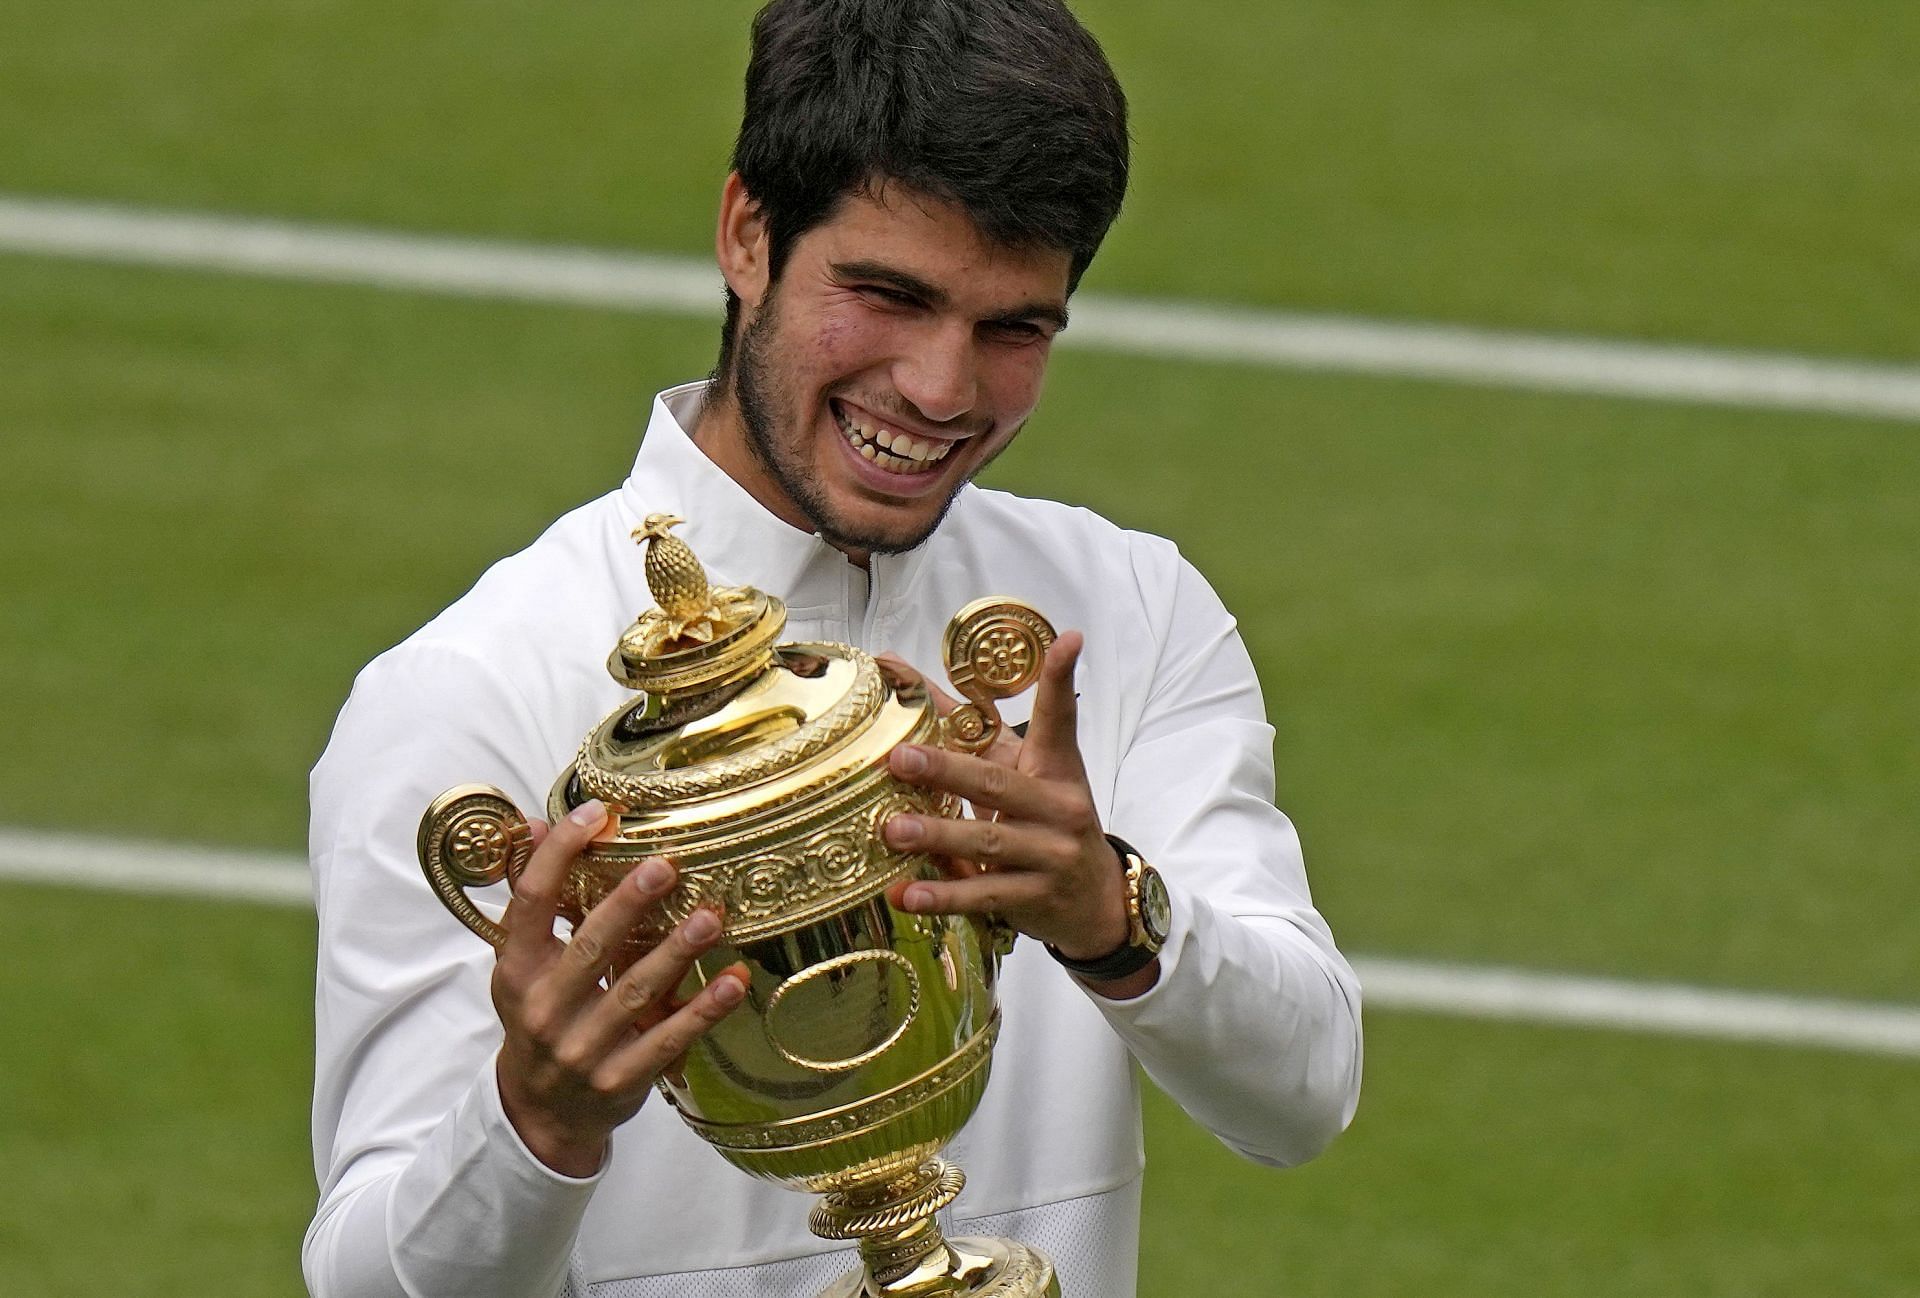 Carlos Alcaraz with the 2023 Wimbledon Championships trophy